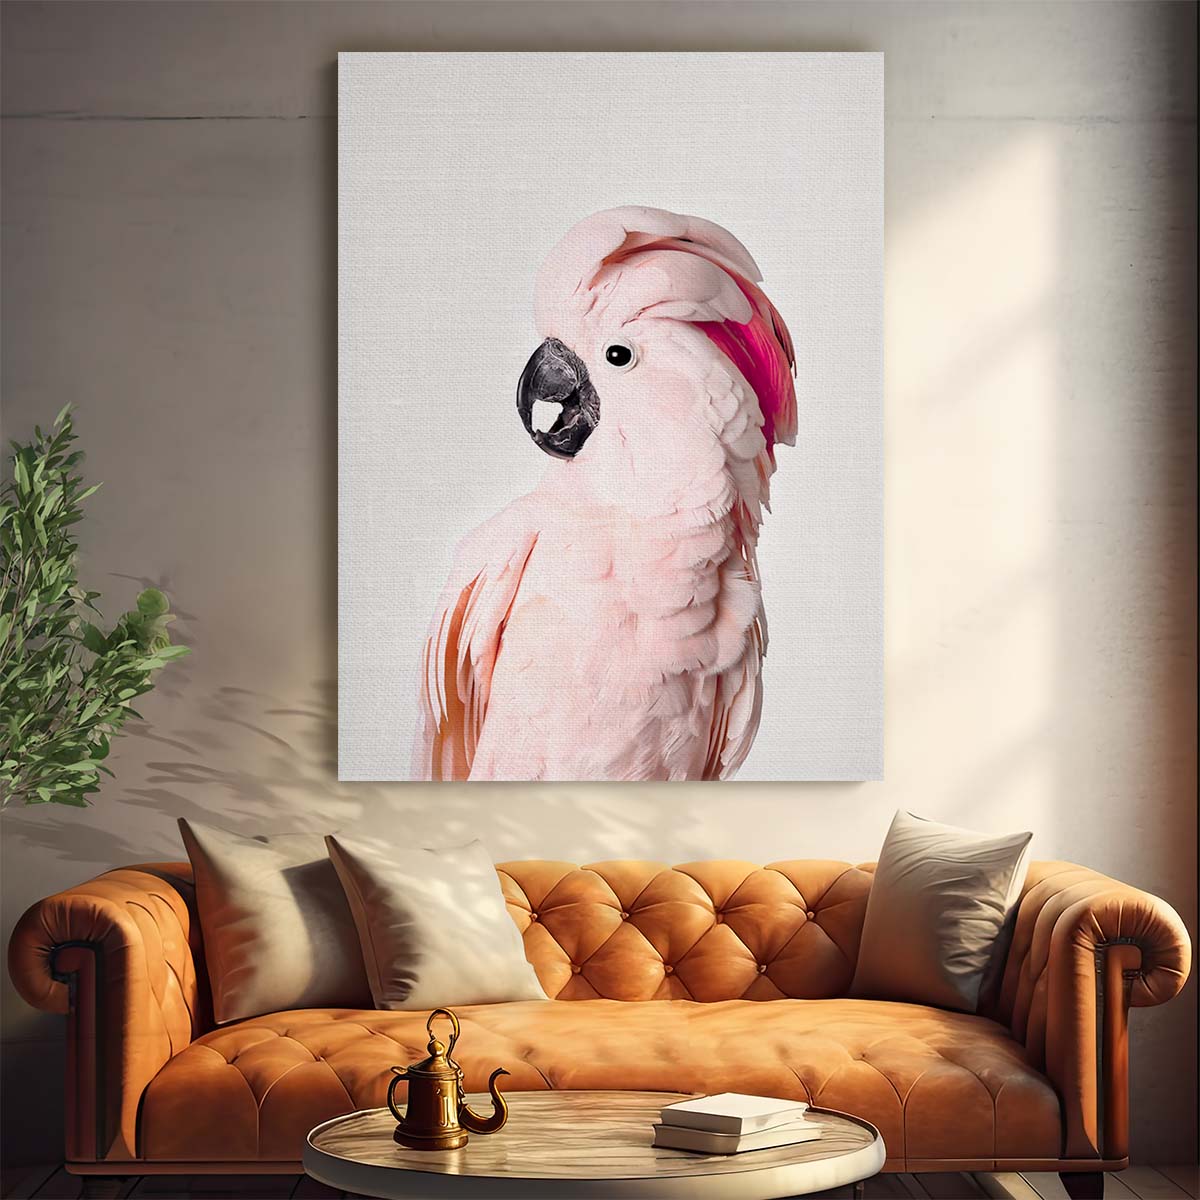 Bright Pink Cockatoo Parrot Photography Artwork on Plain Background by Luxuriance Designs, made in USA